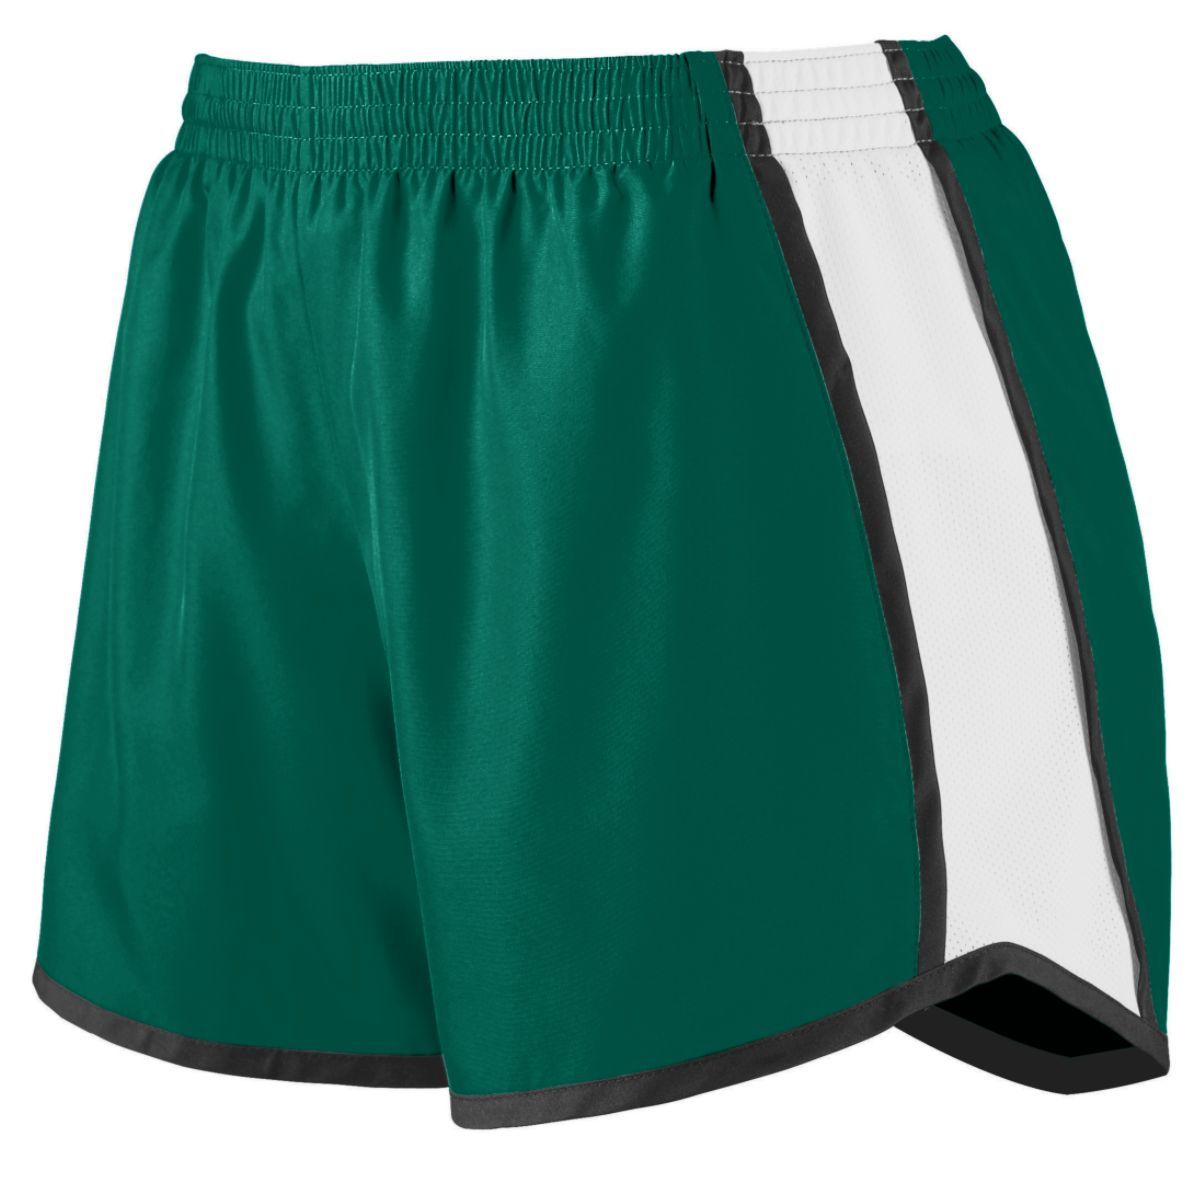 Augusta Sportswear Ladies Pulse Shorts in Dark Green/White/Black  -Part of the Ladies, Ladies-Shorts, Augusta-Products, Volleyball product lines at KanaleyCreations.com